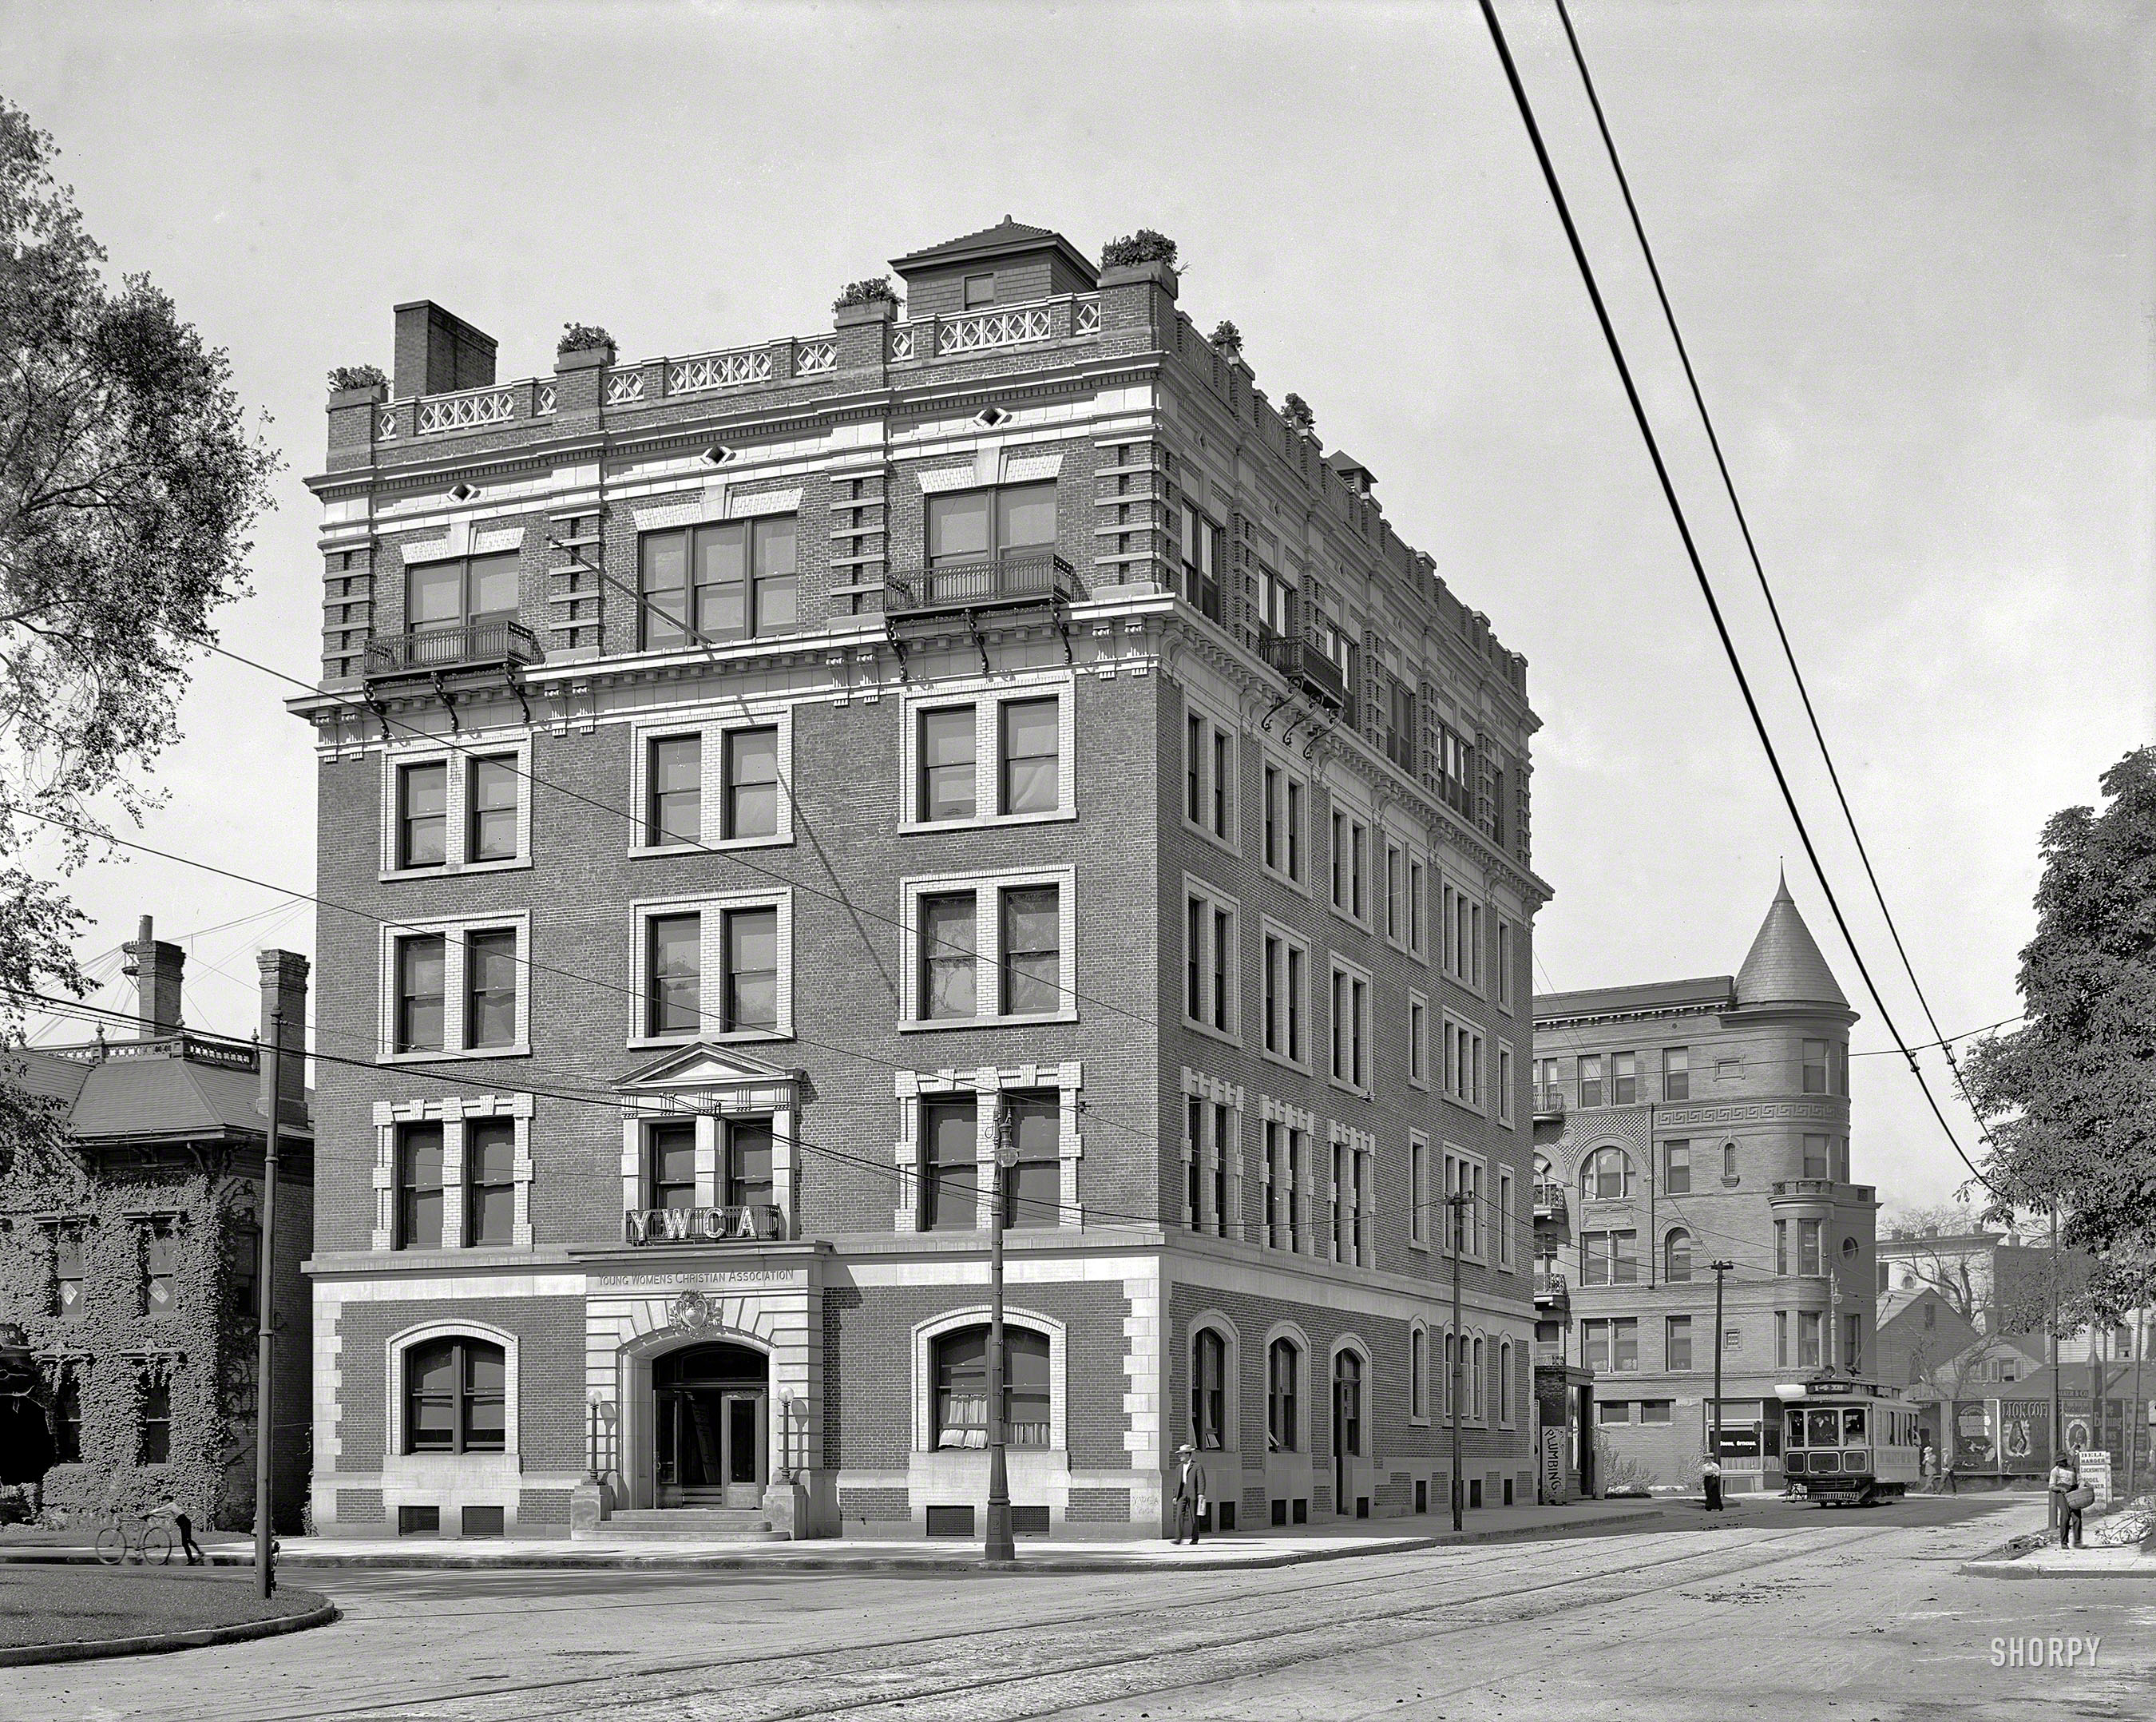 Circa 1906. "Y.W.C.A. building, Detroit." Once again the interesting stuff is at the periphery -- note signage at right advertising Cracker Jack and the services of a "bell hanger." 8x10 inch glass negative, Detroit Publishing Co. View full size.